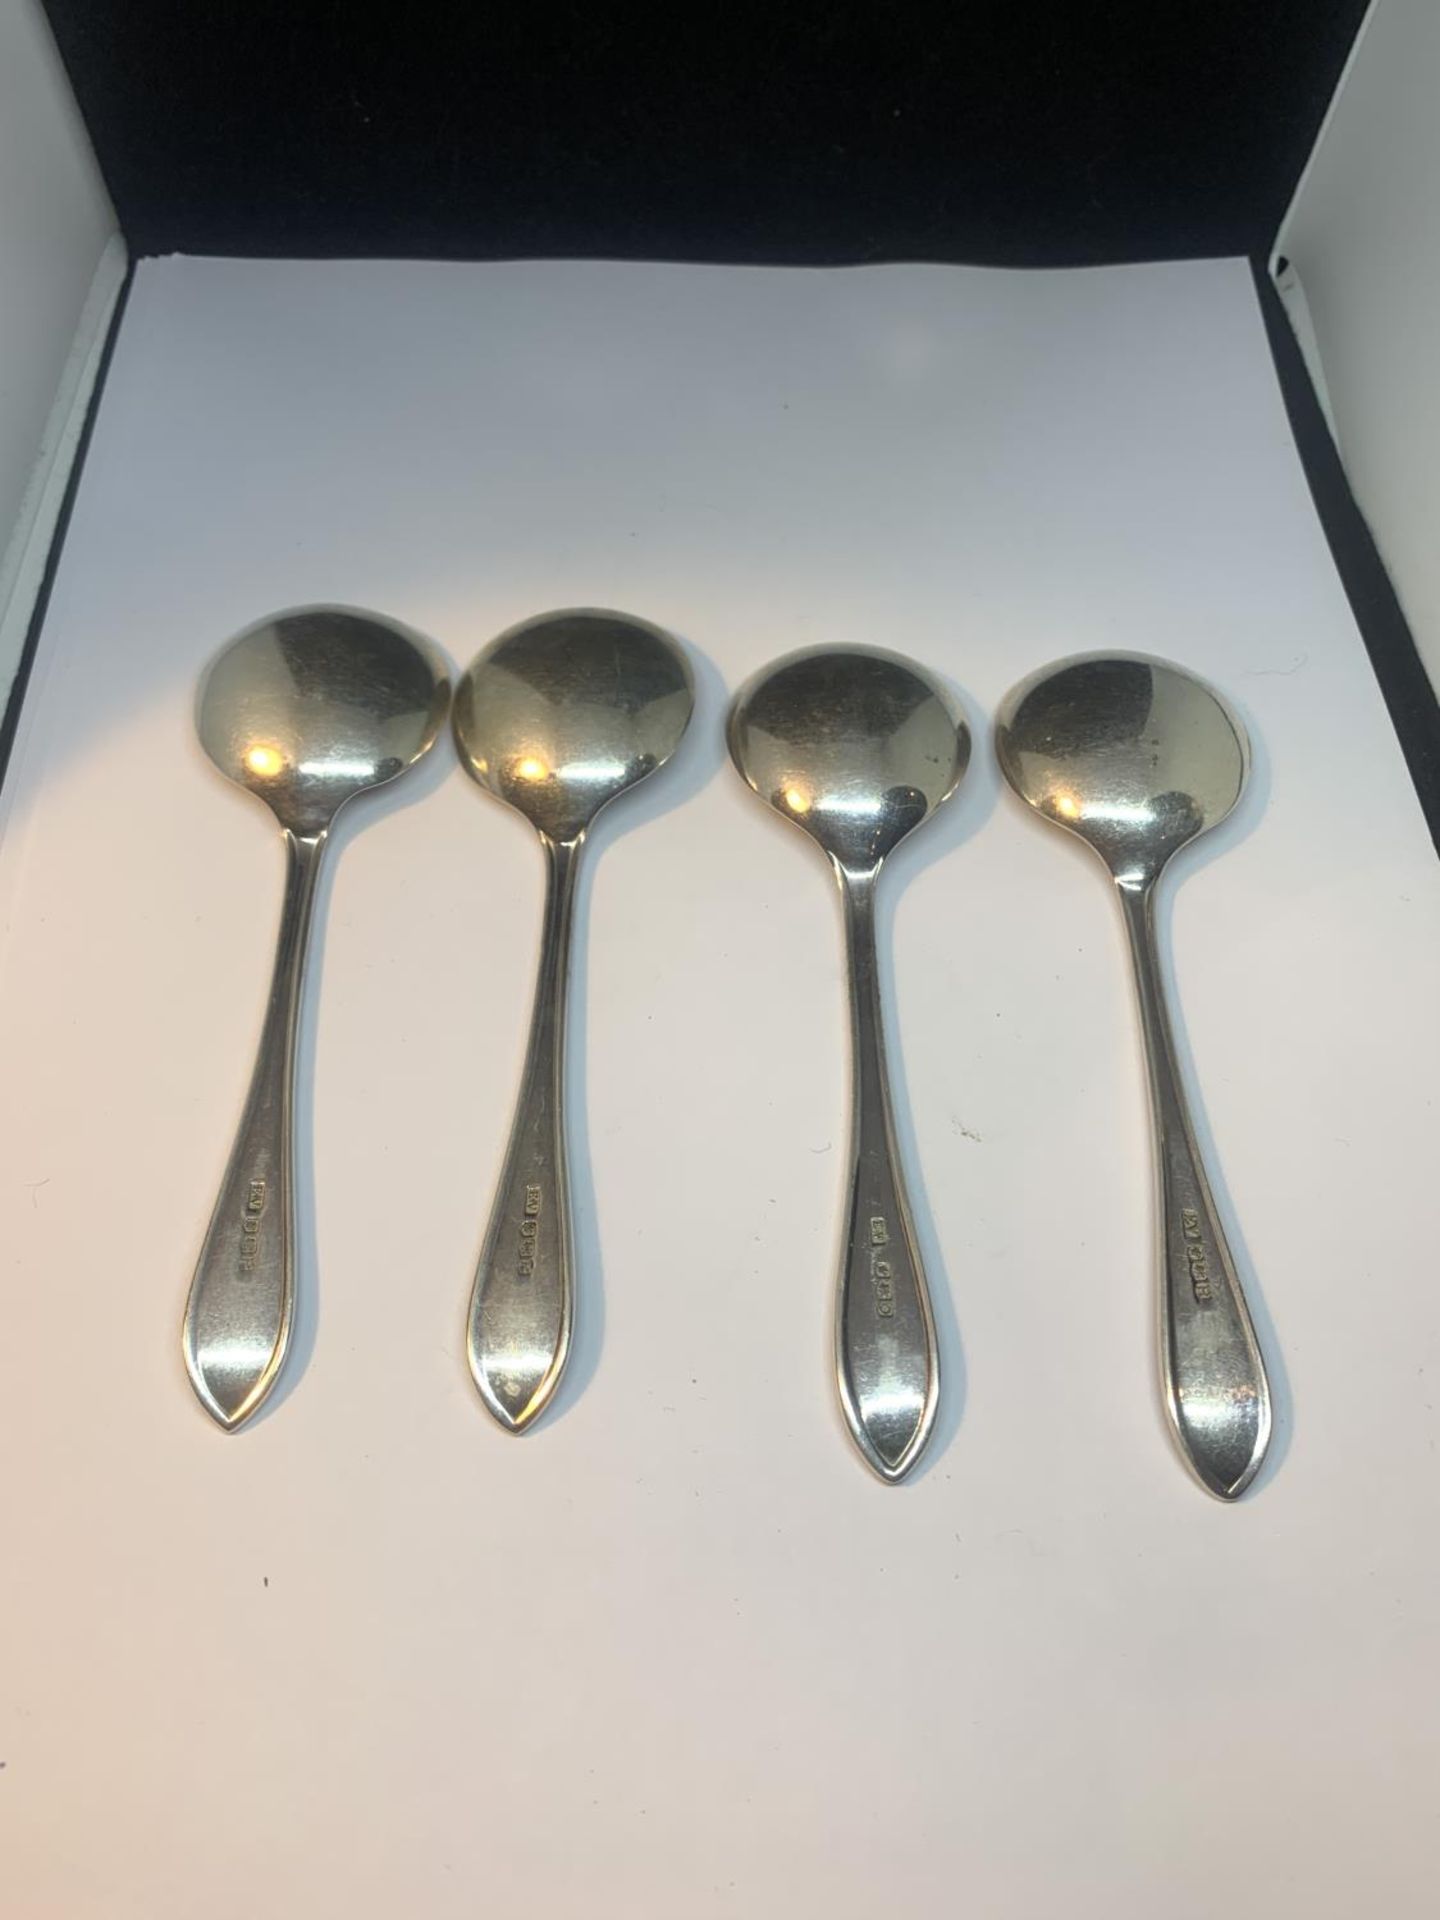 FOUR HALLMARKED SHEFFIELD SILVER DESSERT SPOONS GROSS WEIGHT 113.8 GRAMS - Image 2 of 3